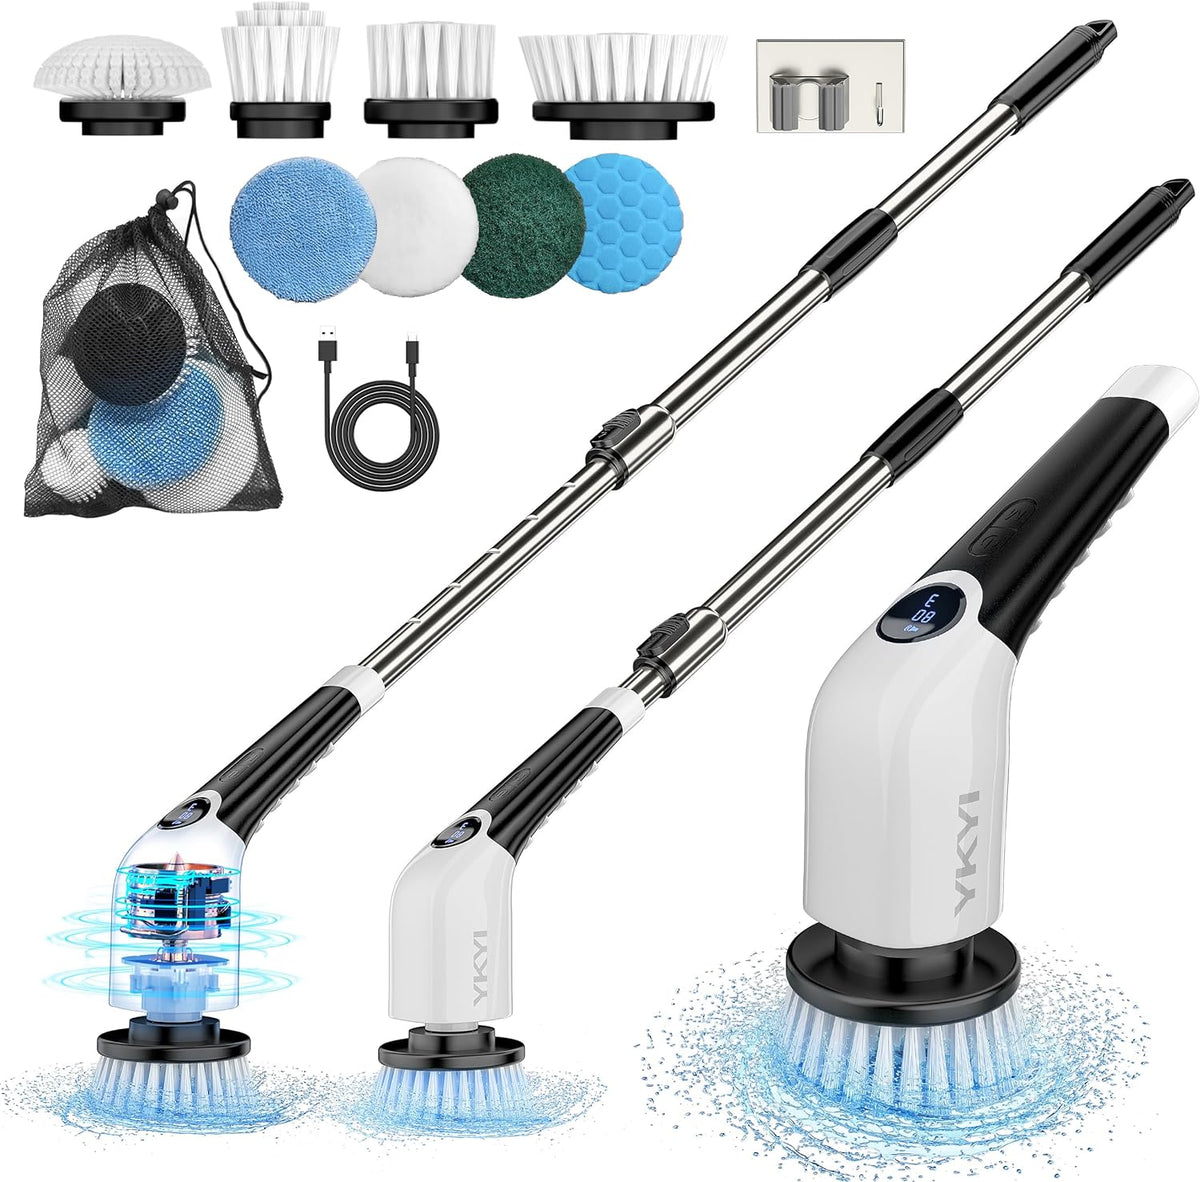 8 In 1 Electric Spin Scrubber,Cordless Scrubber Cleaning Brush with 7  Replaceable Brush Heads,2 Speeds Power Scrubber Brush for  Bathroom,Tub,Floor,Car,Tile,Black 